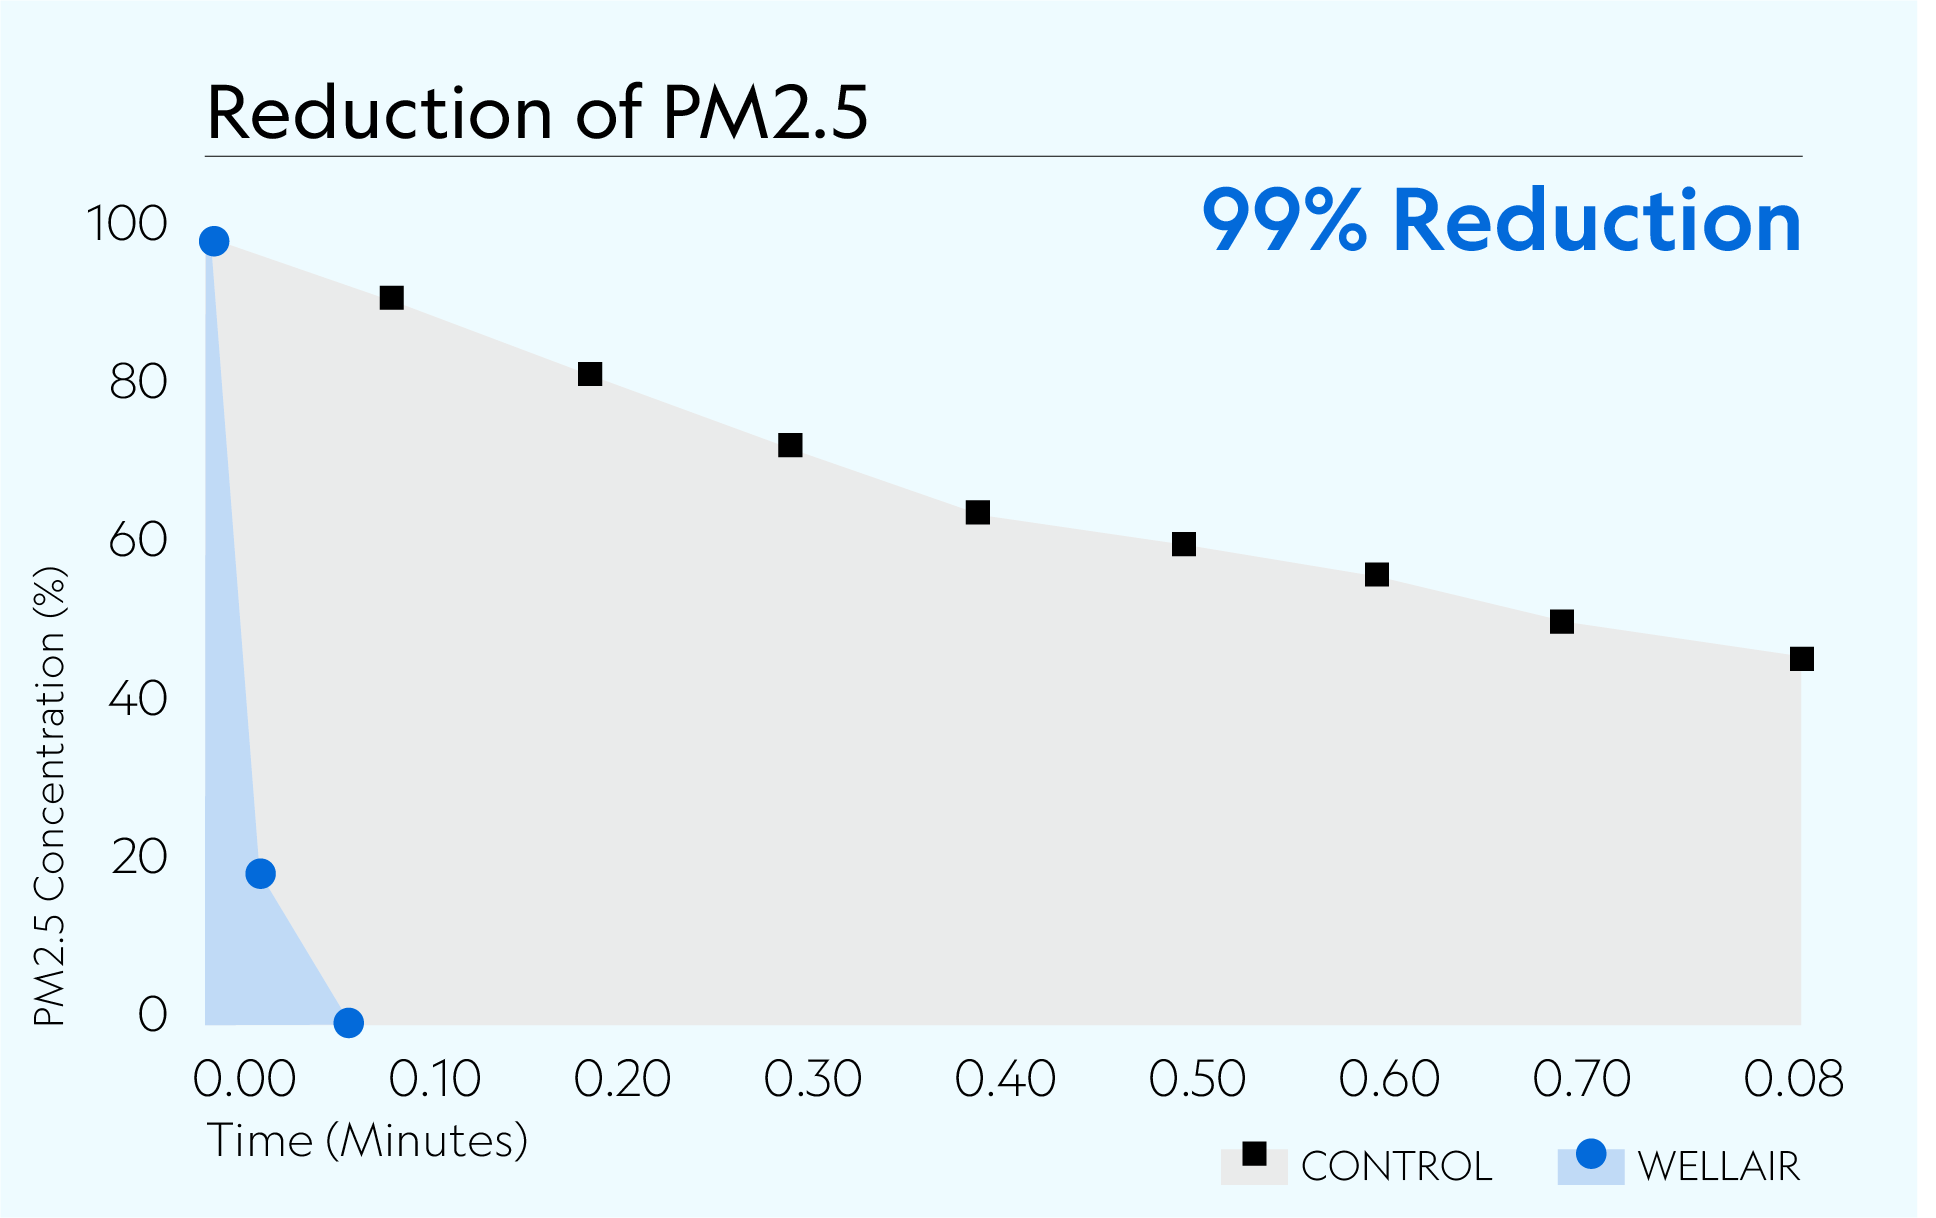 Defend 1050 achieved 99% reduction of PM2.5